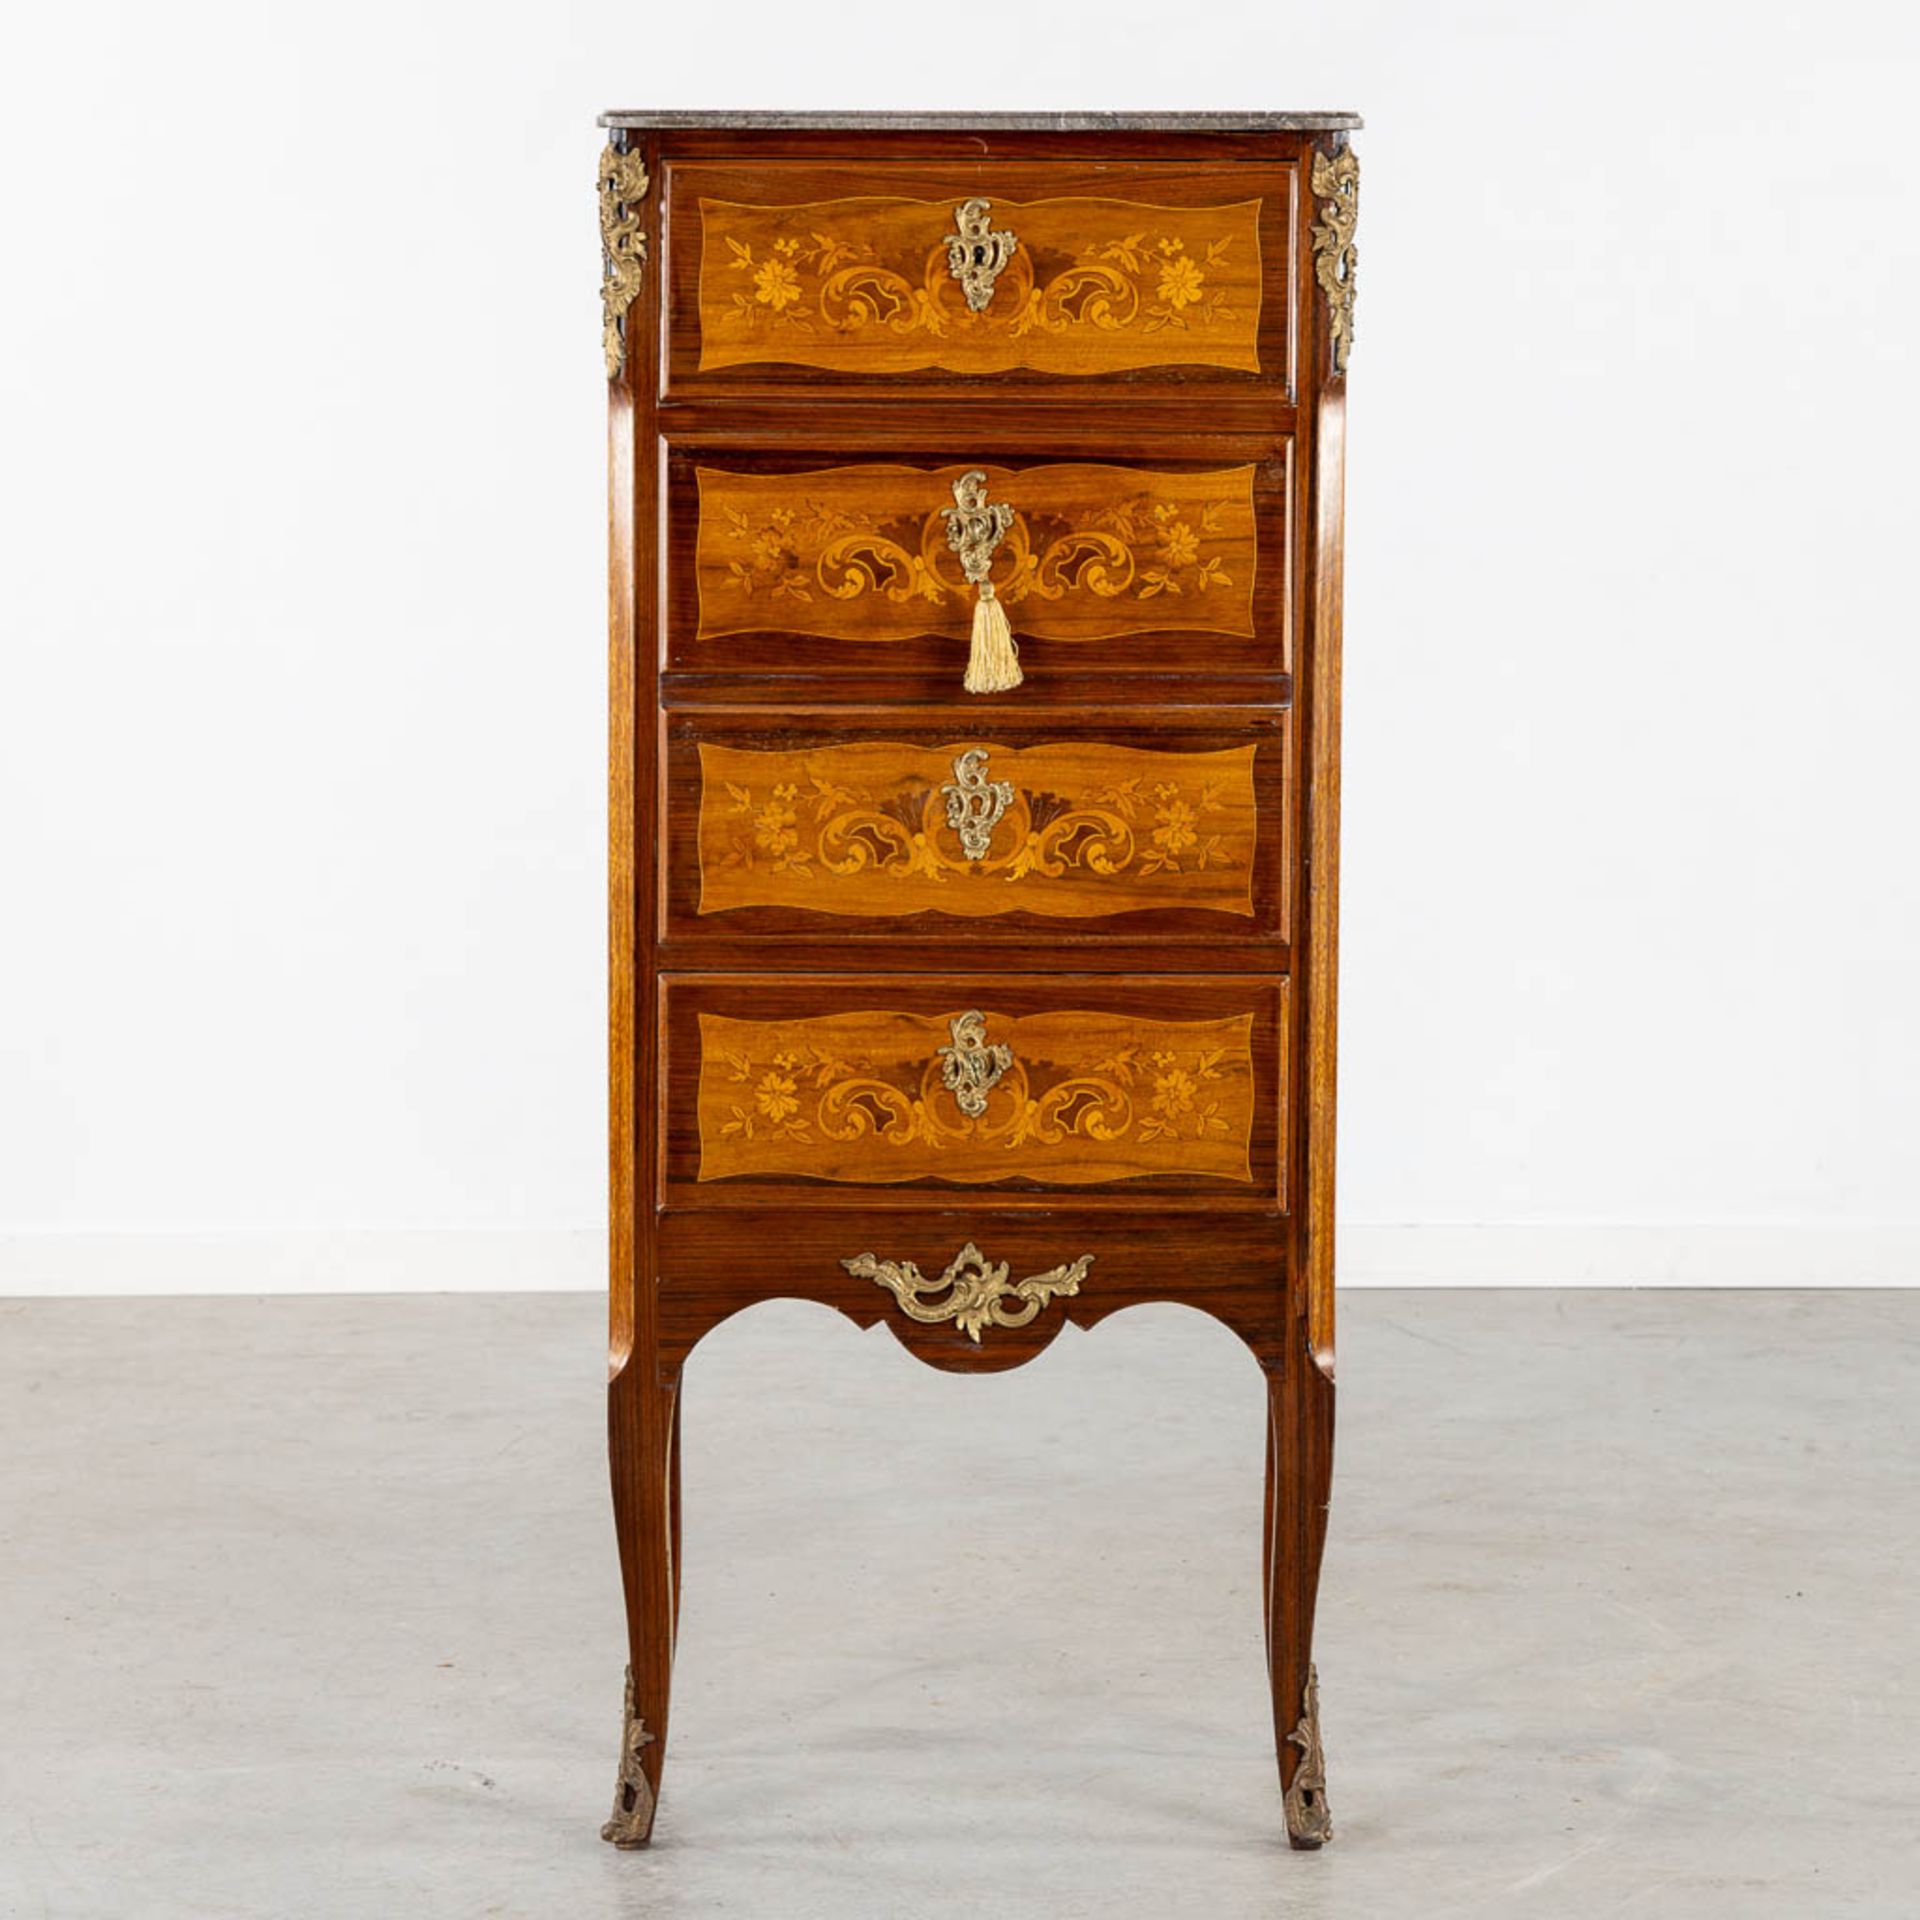 A Secretaire cabinet, Marquetry inlay and mounted with bronze. Circa 1900. (L:34 x W:56 x H:128 cm) - Image 6 of 15